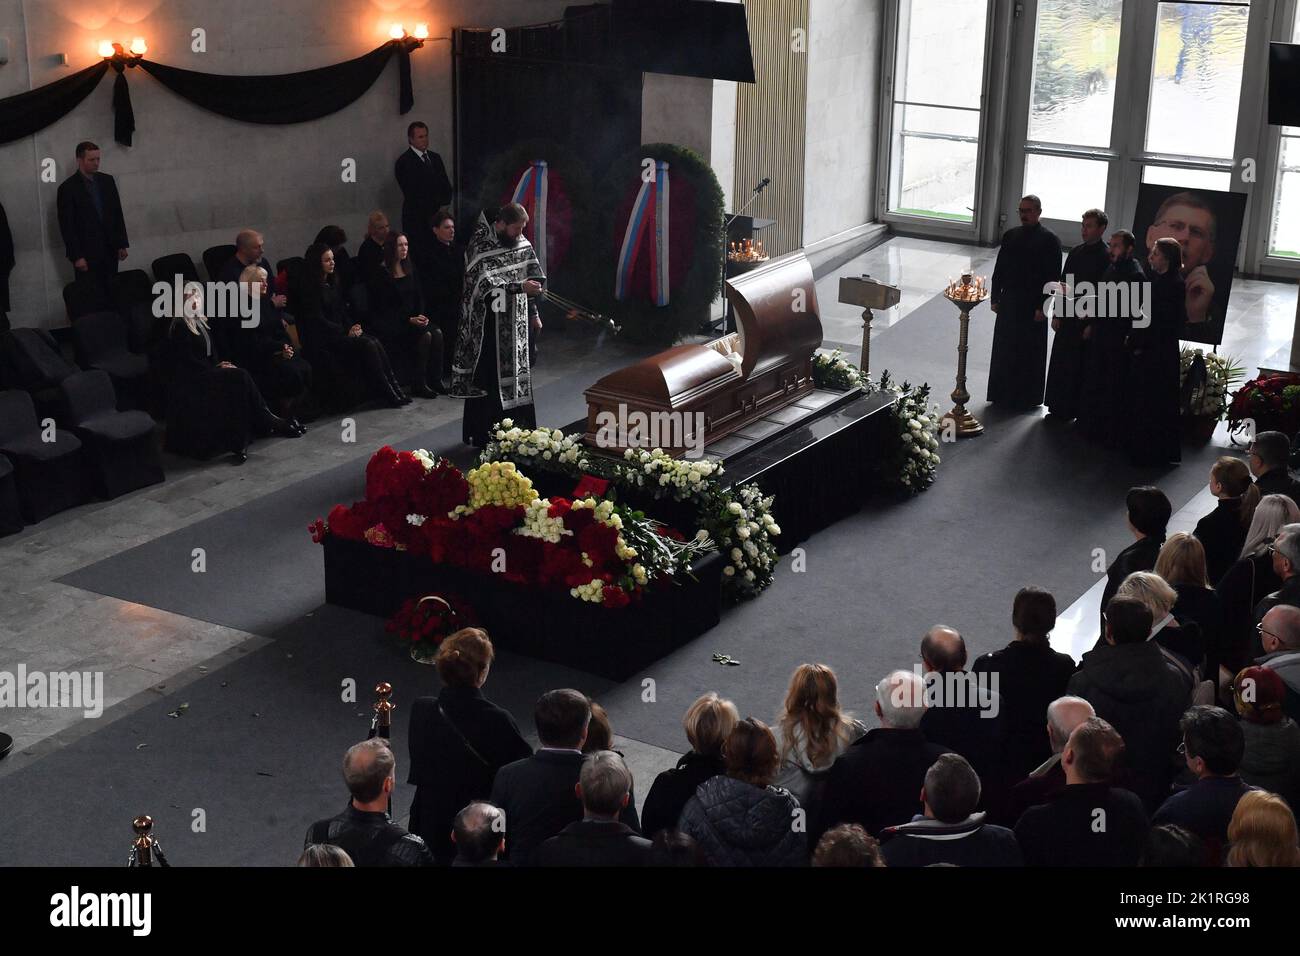 Moscow. The priest during the burial service of the CEO of media group of Komsomolskaya Pravda Vladimir Sungorkin in the funeral house of Troyekurovo. Stock Photo